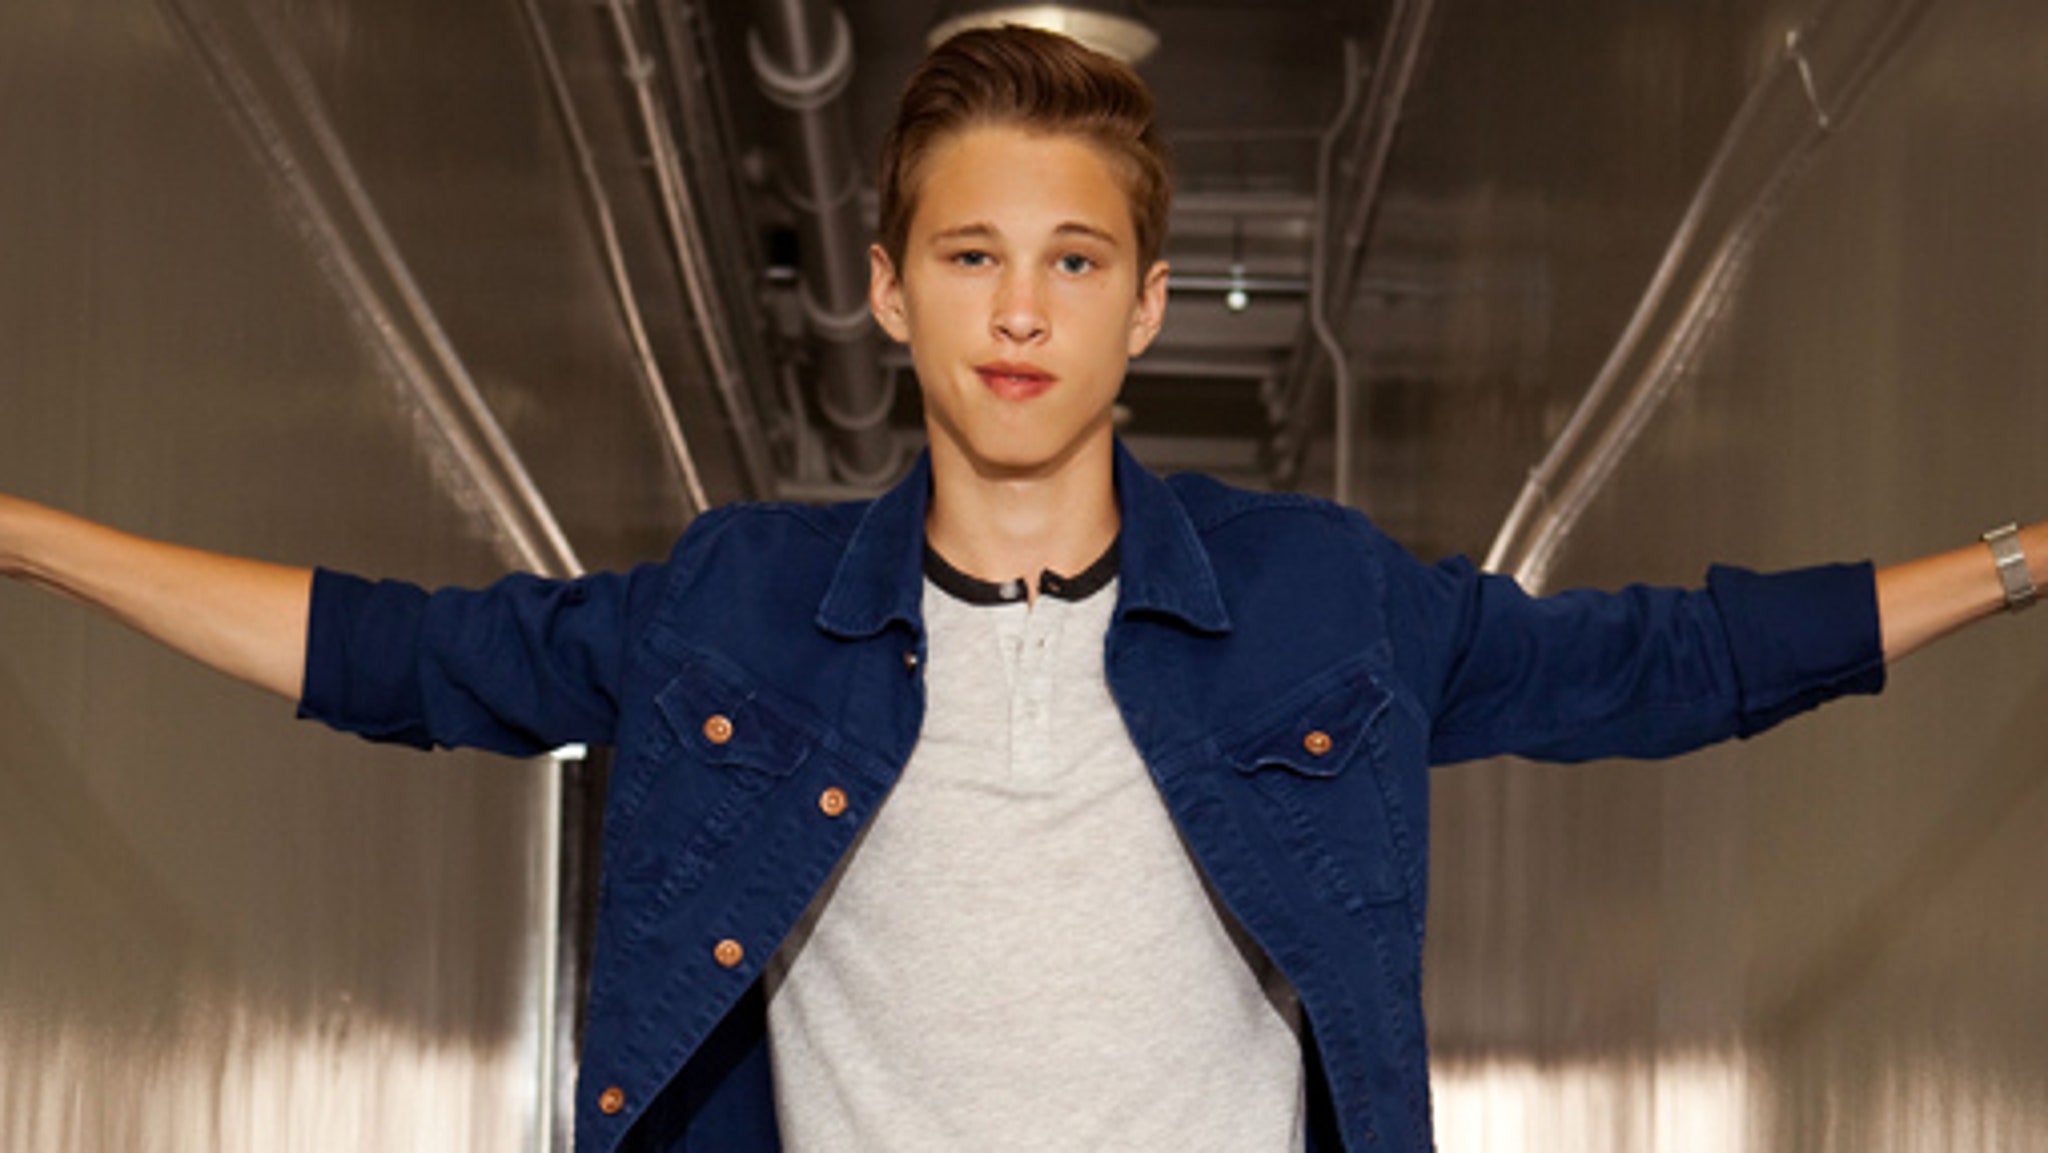 Teen Idol Ryan Beatty Talks Prom, Reveals What He's Most Nervous About!